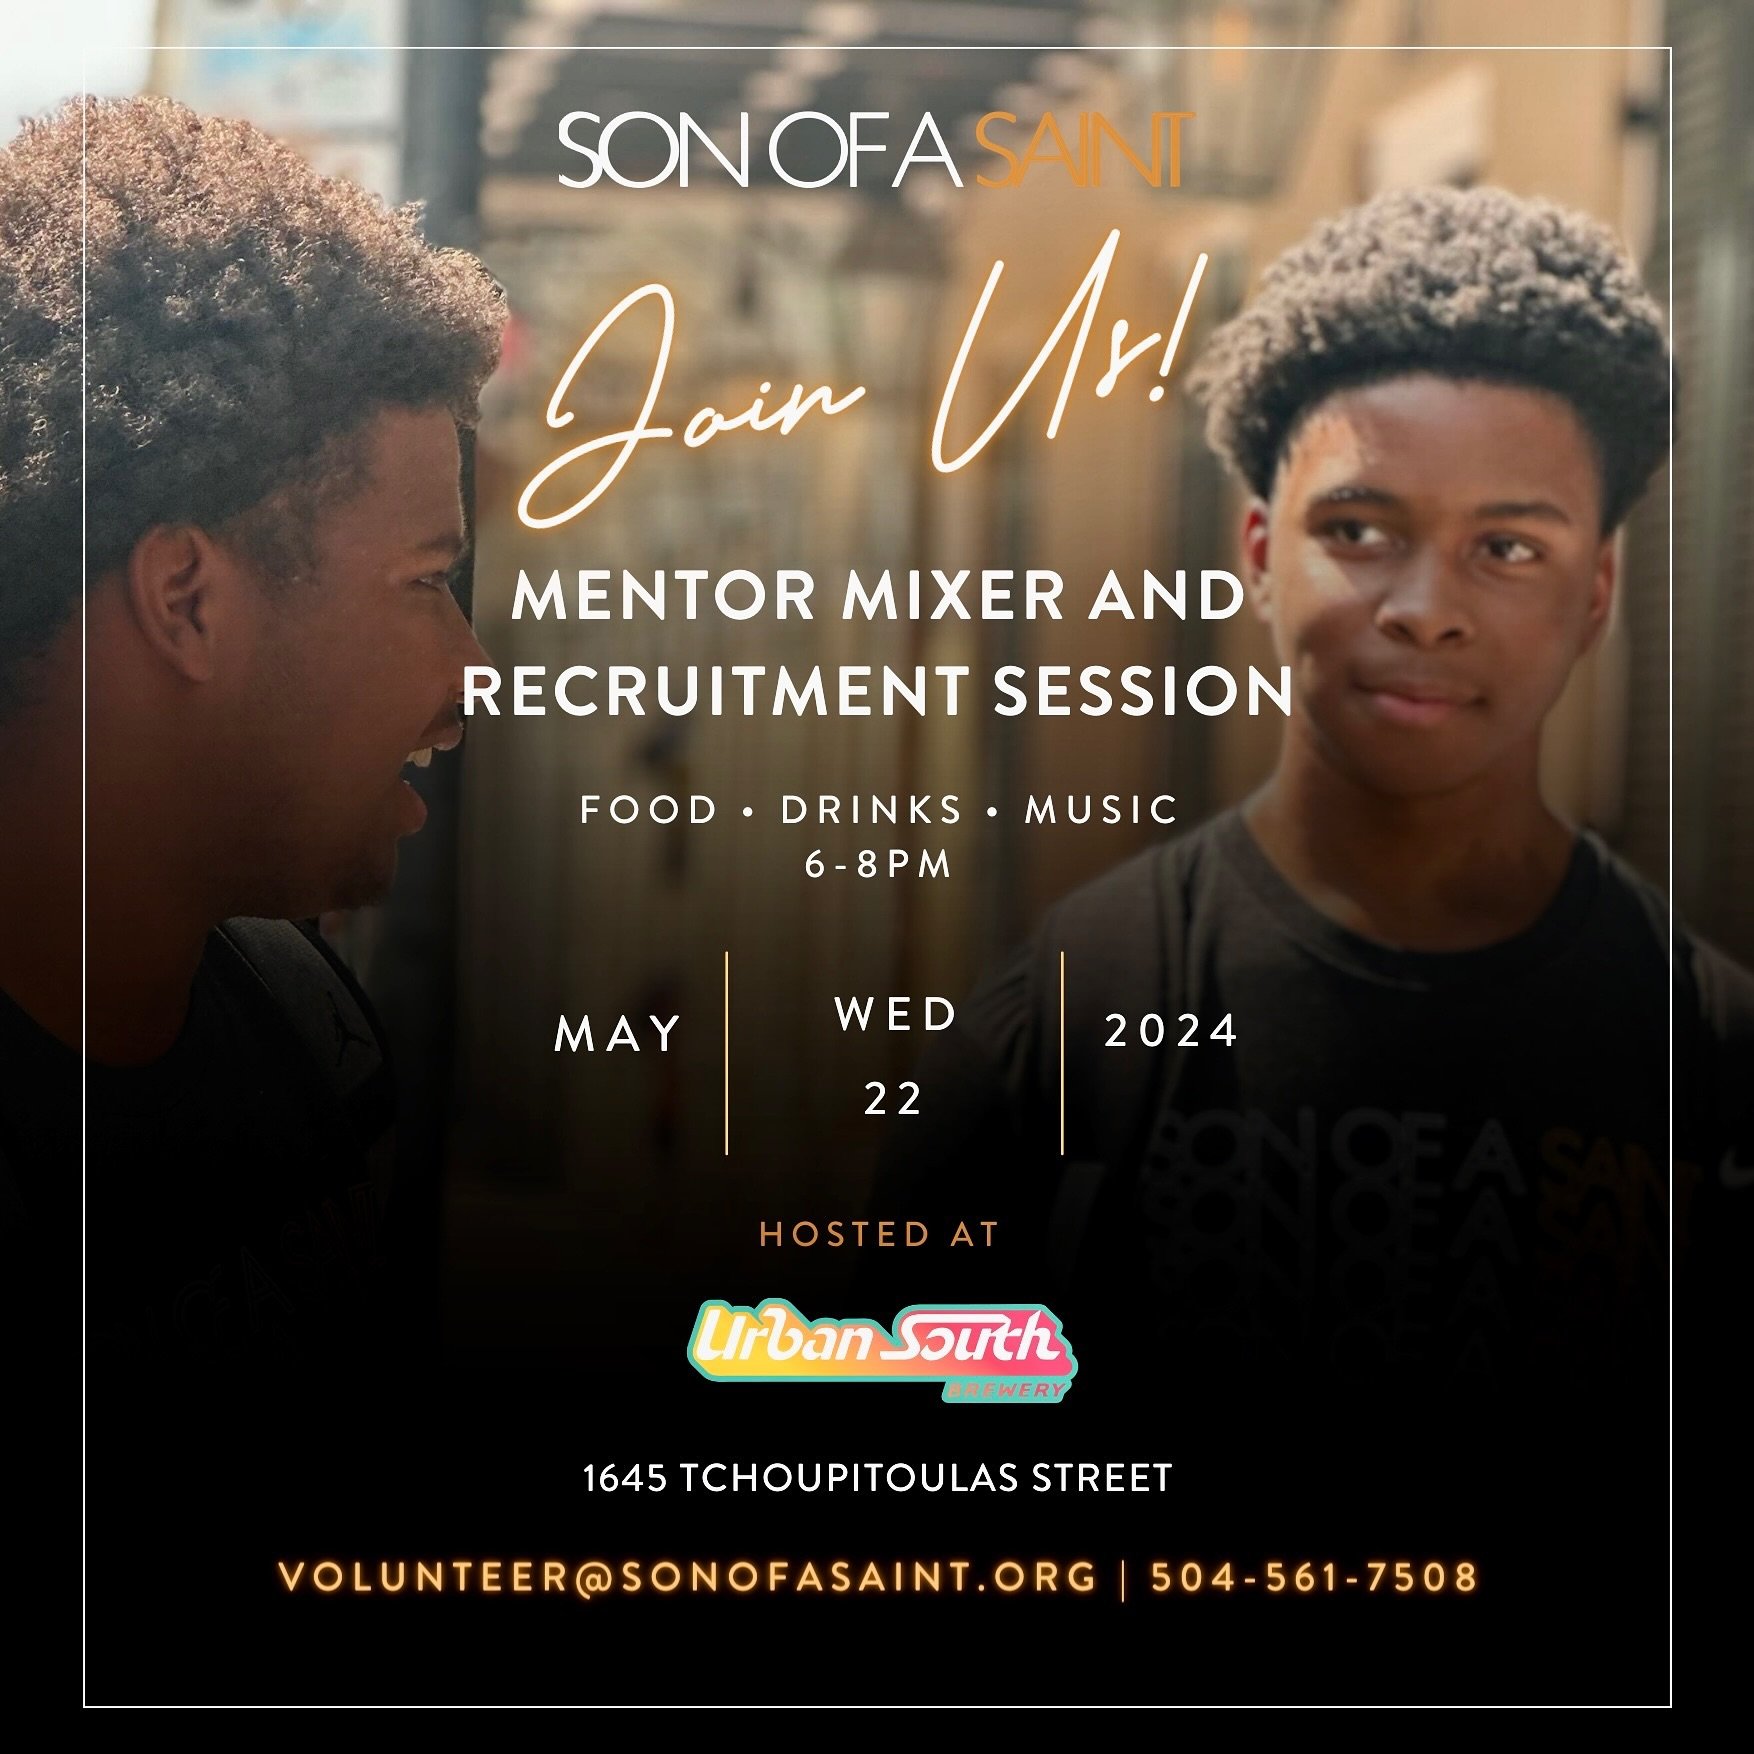 Calling all gentlemen in NOLA! Ready to make a real impact in young lives? Join us on May 22 at Urban South Brewery for our Son of a Saint Mentor Mixer &amp; Recruitment Session! 

Let&rsquo;s inspire, guide, and uplift the next generation together. 